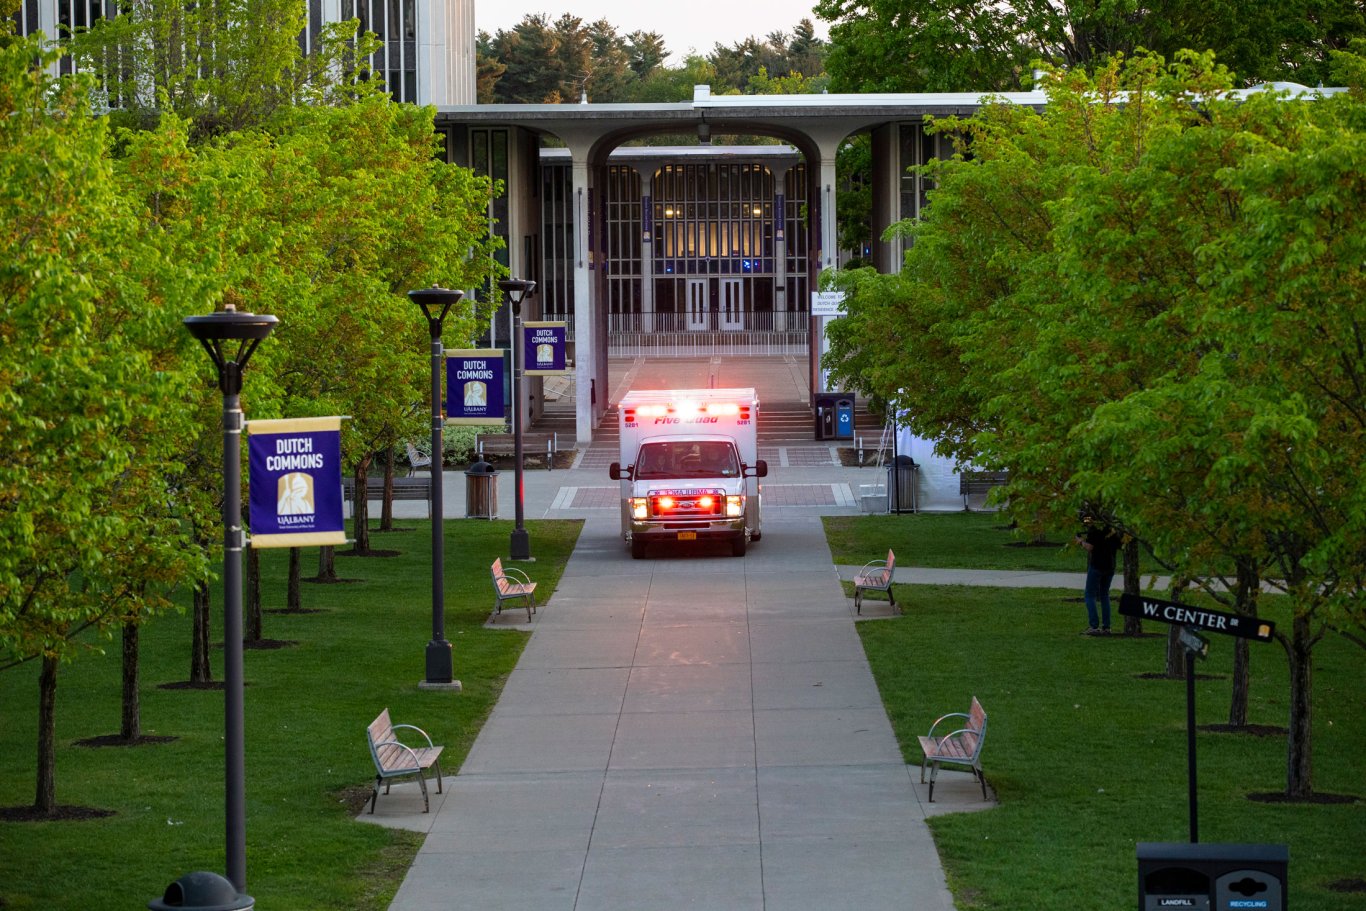 A Five Quad ambulance with emergency lights drives down the pathway lined with green grass and trees on Dutch Commons on the Uptown Campus.